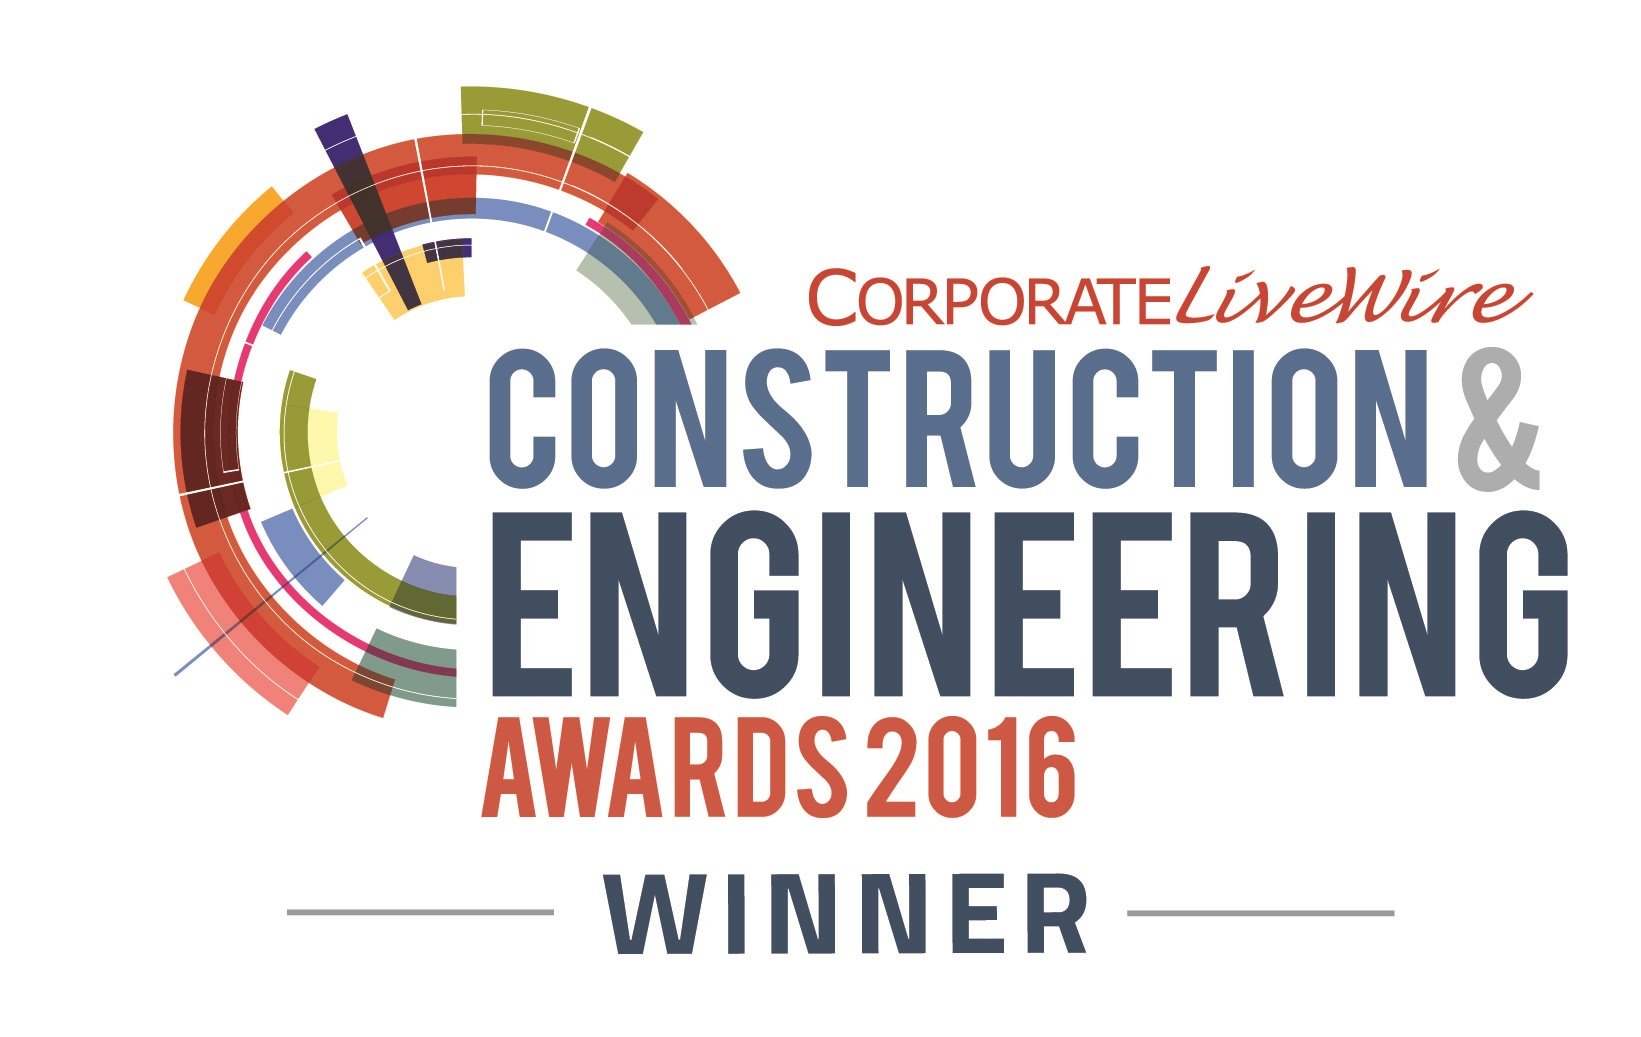 Giatec wins a 2016 Corporate LiveWire Construction & Engineering Award